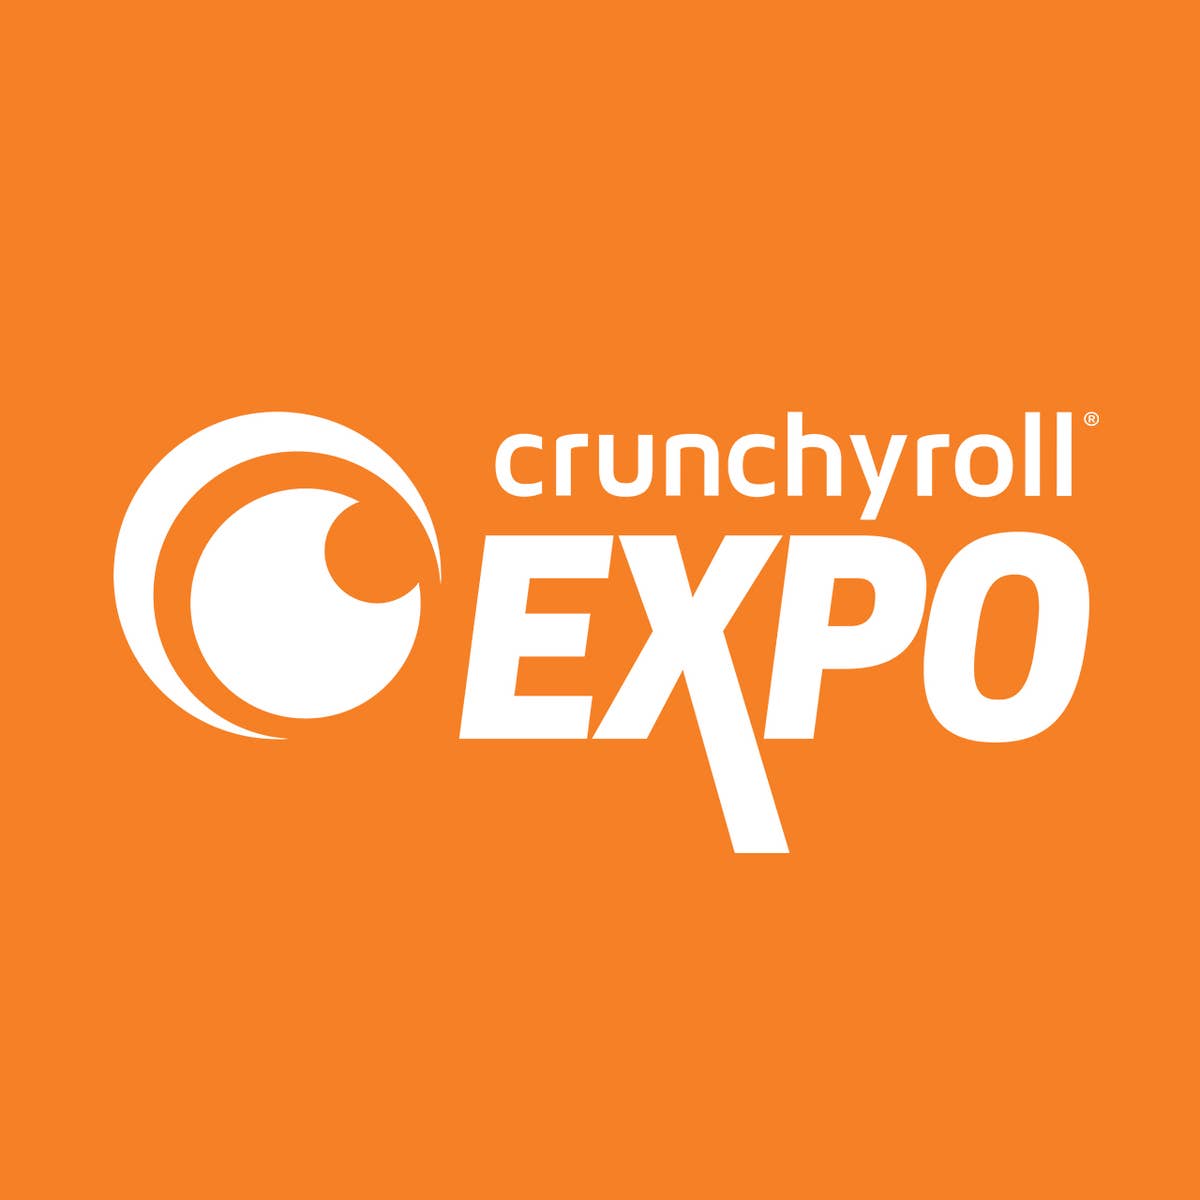 Crunchyroll San Diego Comic Con: All the CR Events Happening